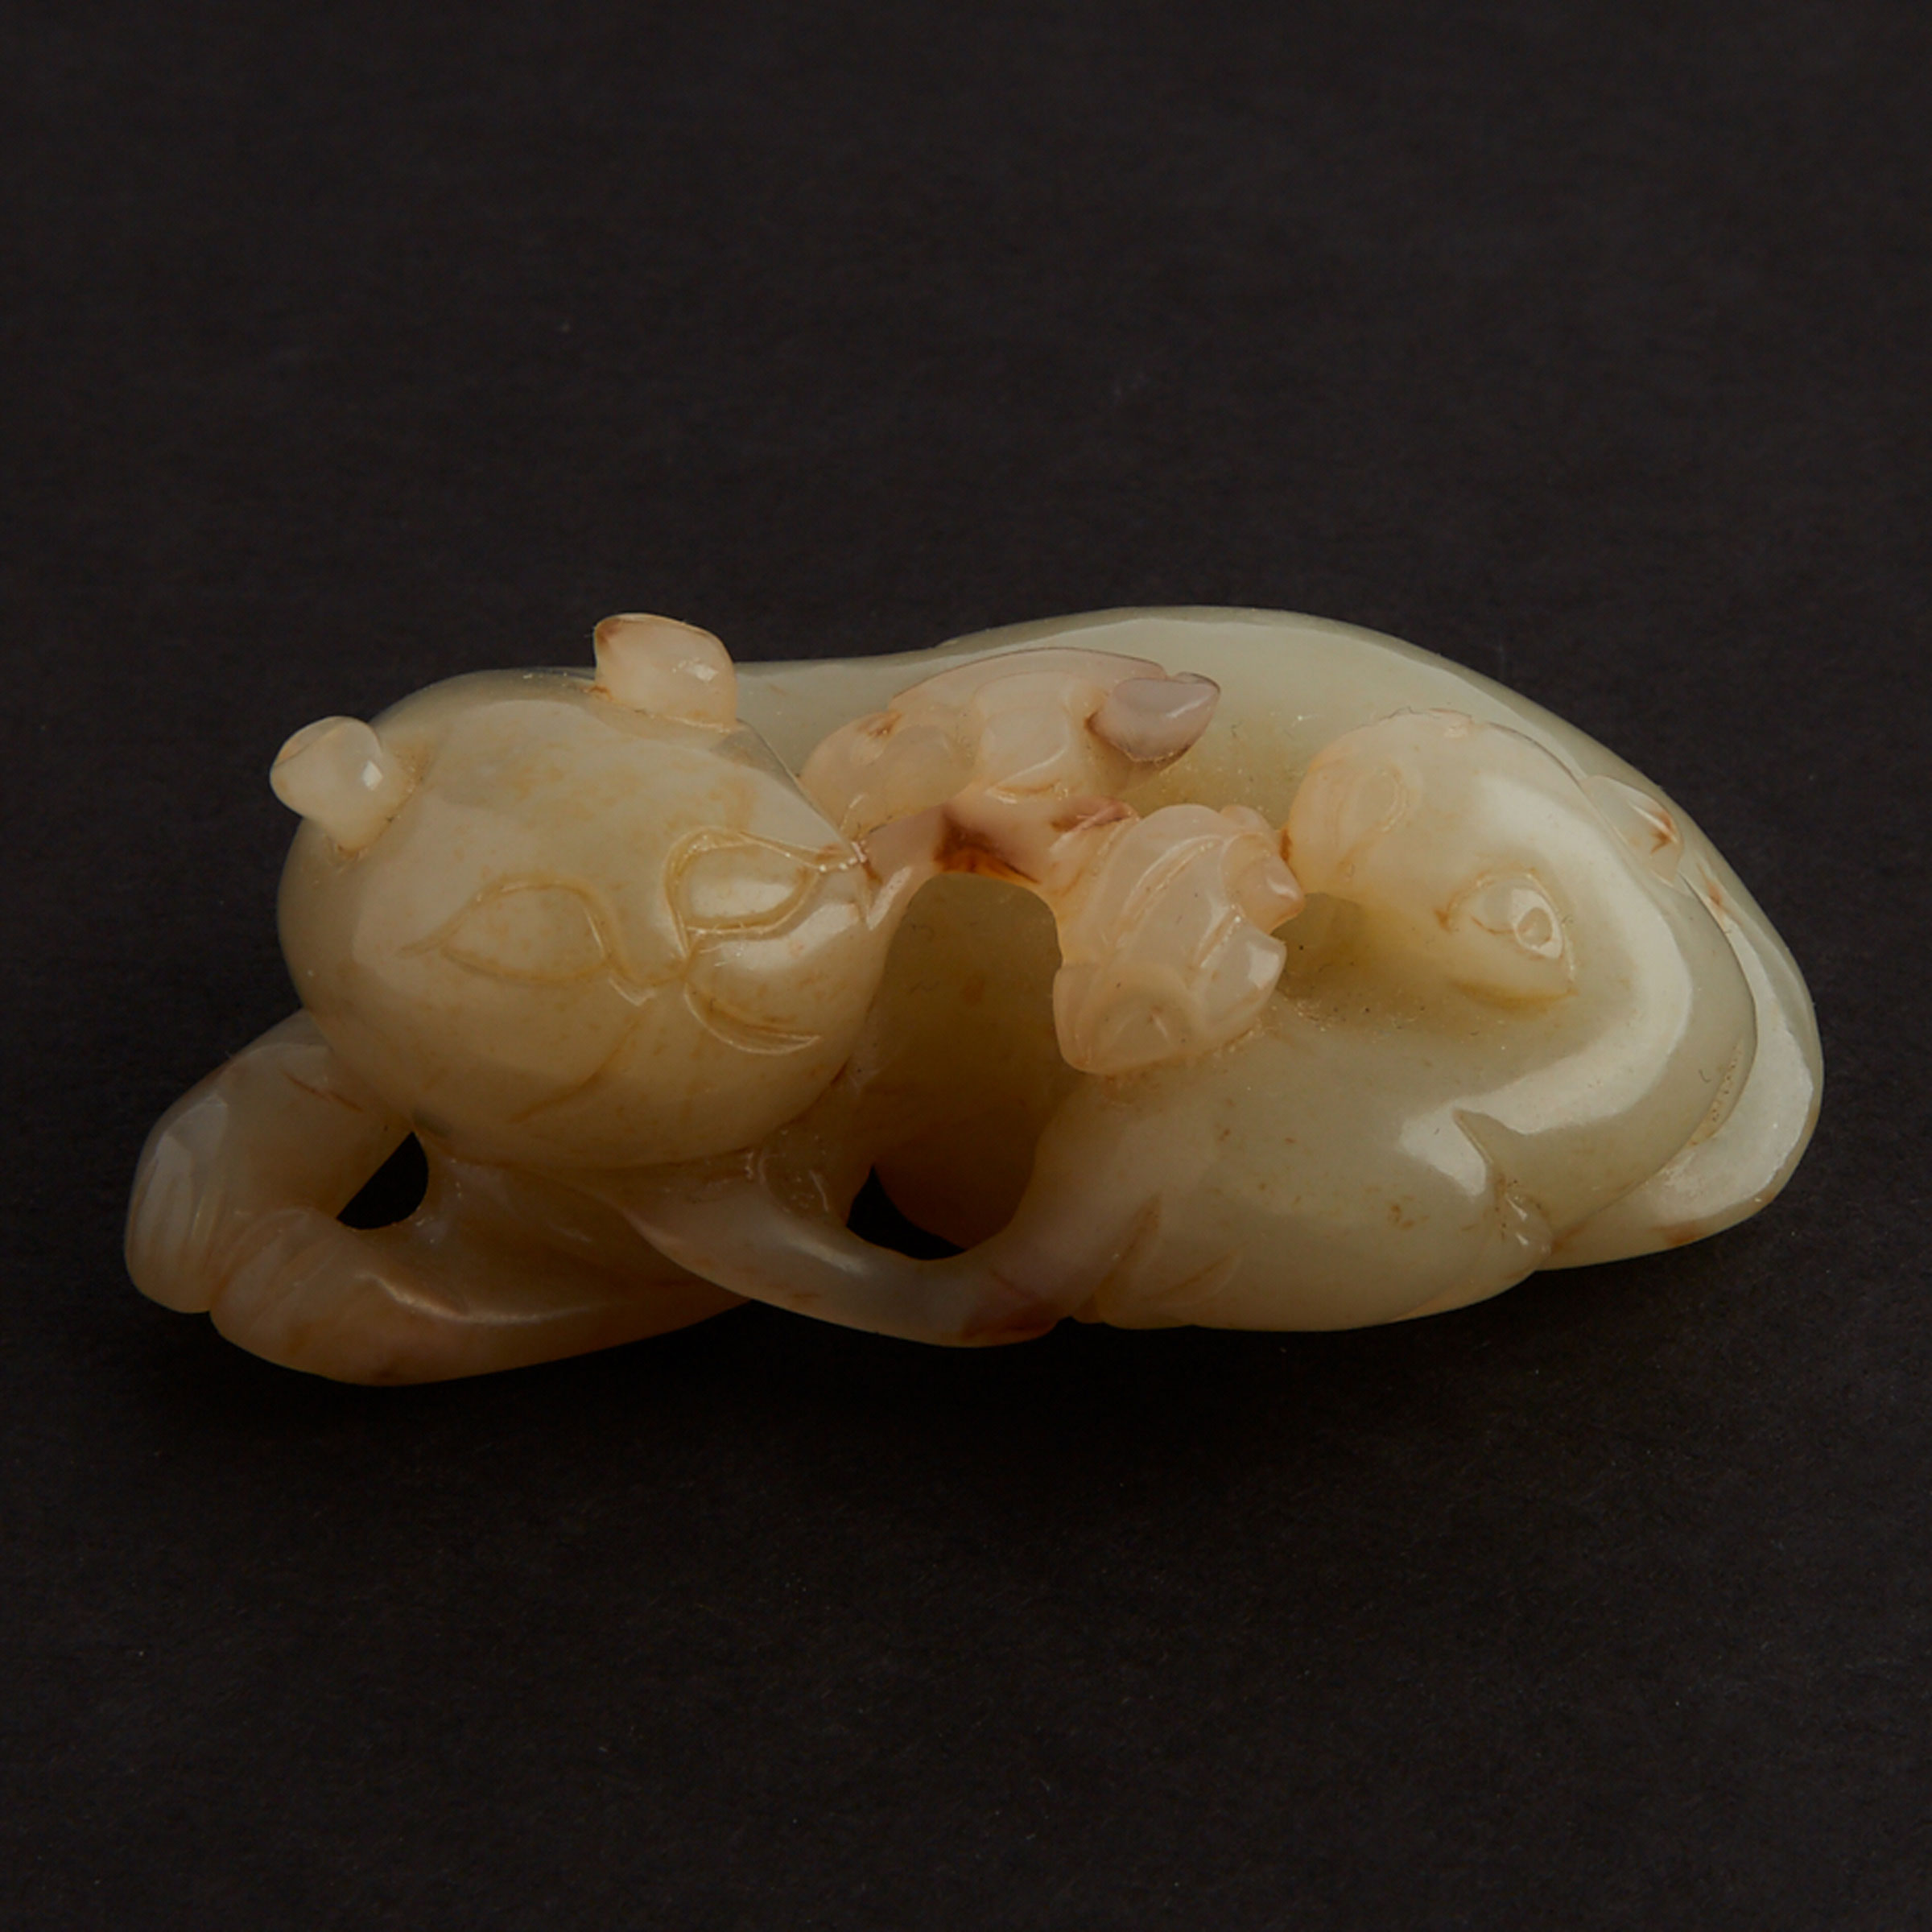 A Celadon Jade Carving of Two Cats